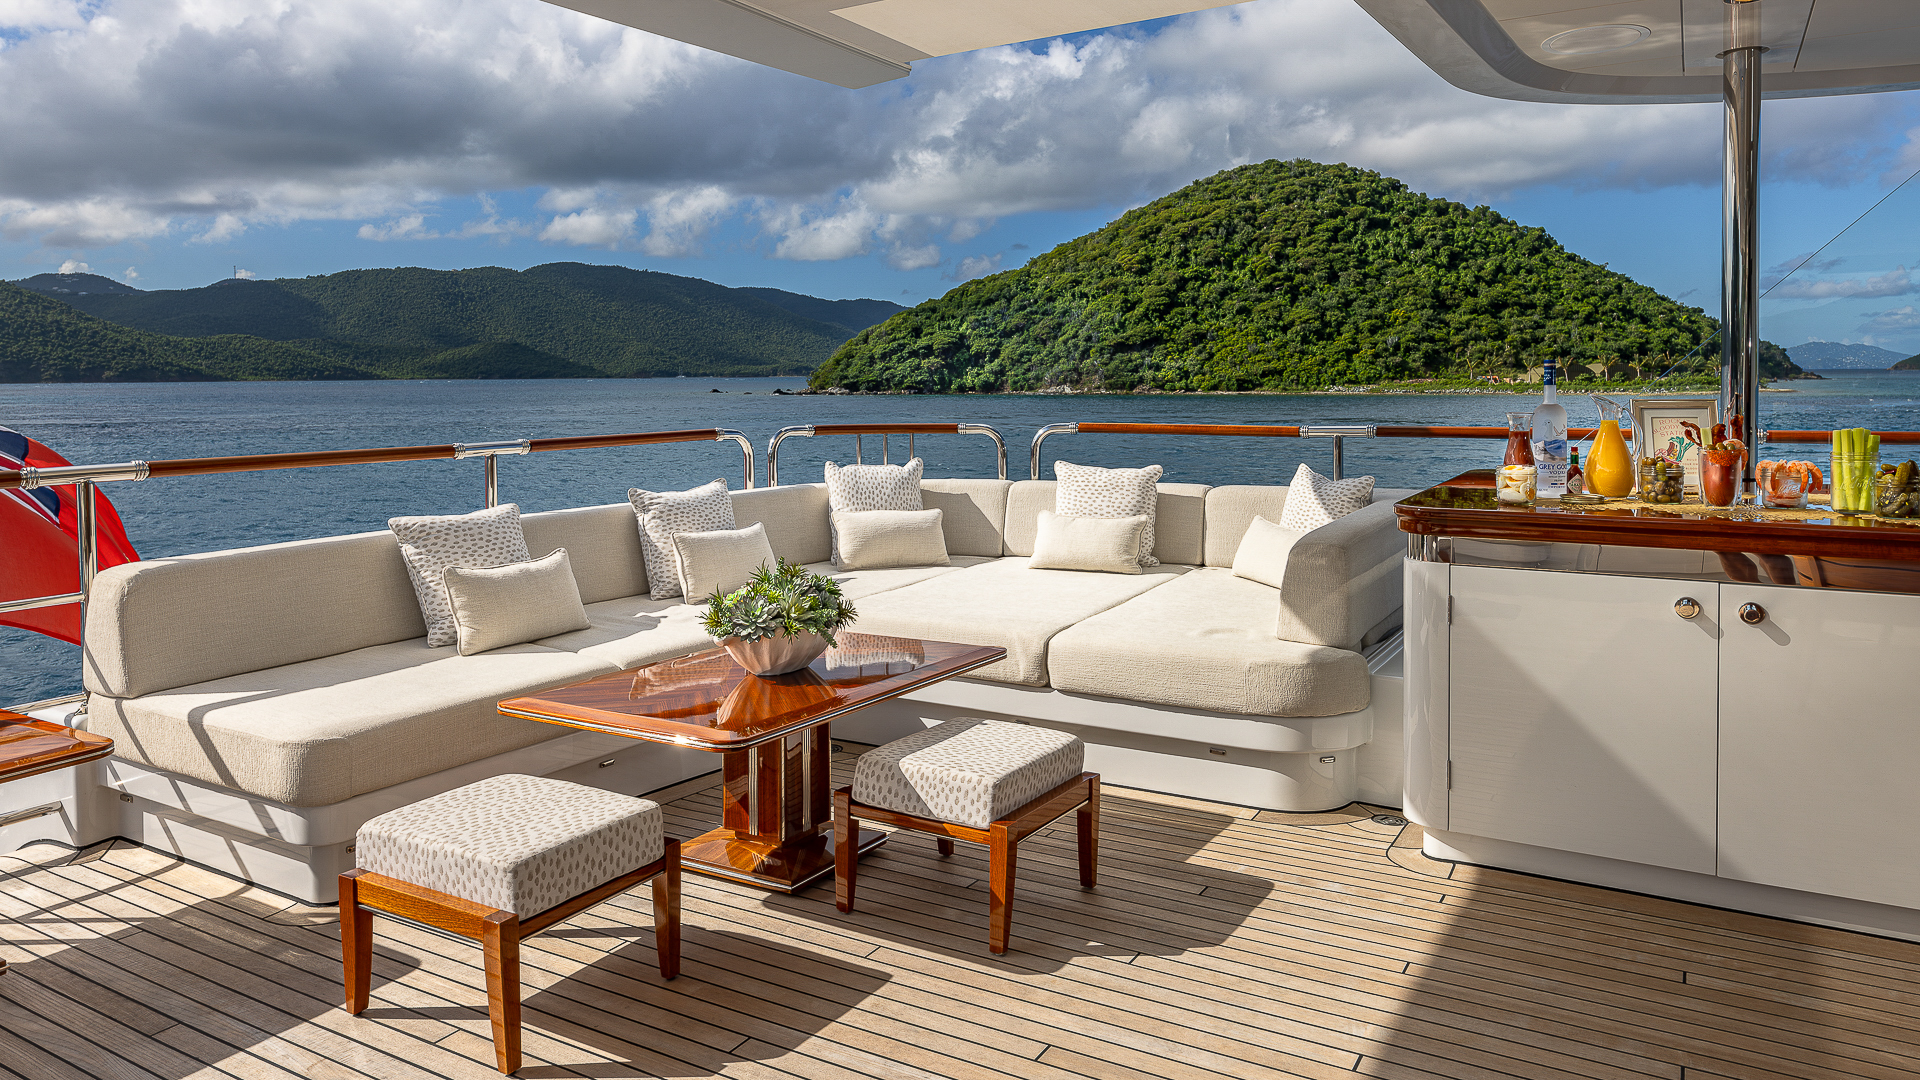 Rock It Sundeck Port Lounging Area Aft Credit Yachting Image